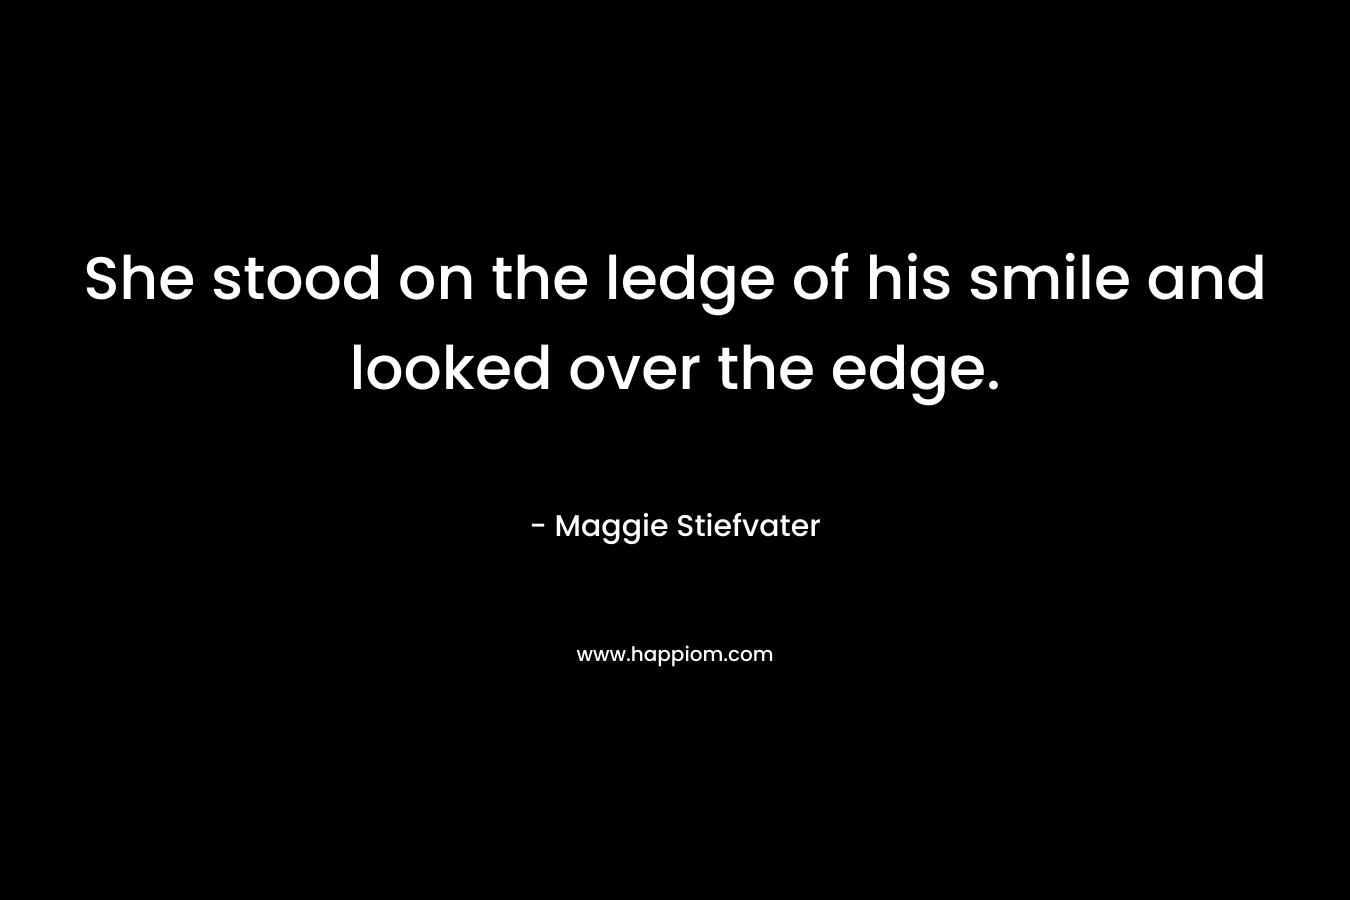 She stood on the ledge of his smile and looked over the edge. – Maggie Stiefvater